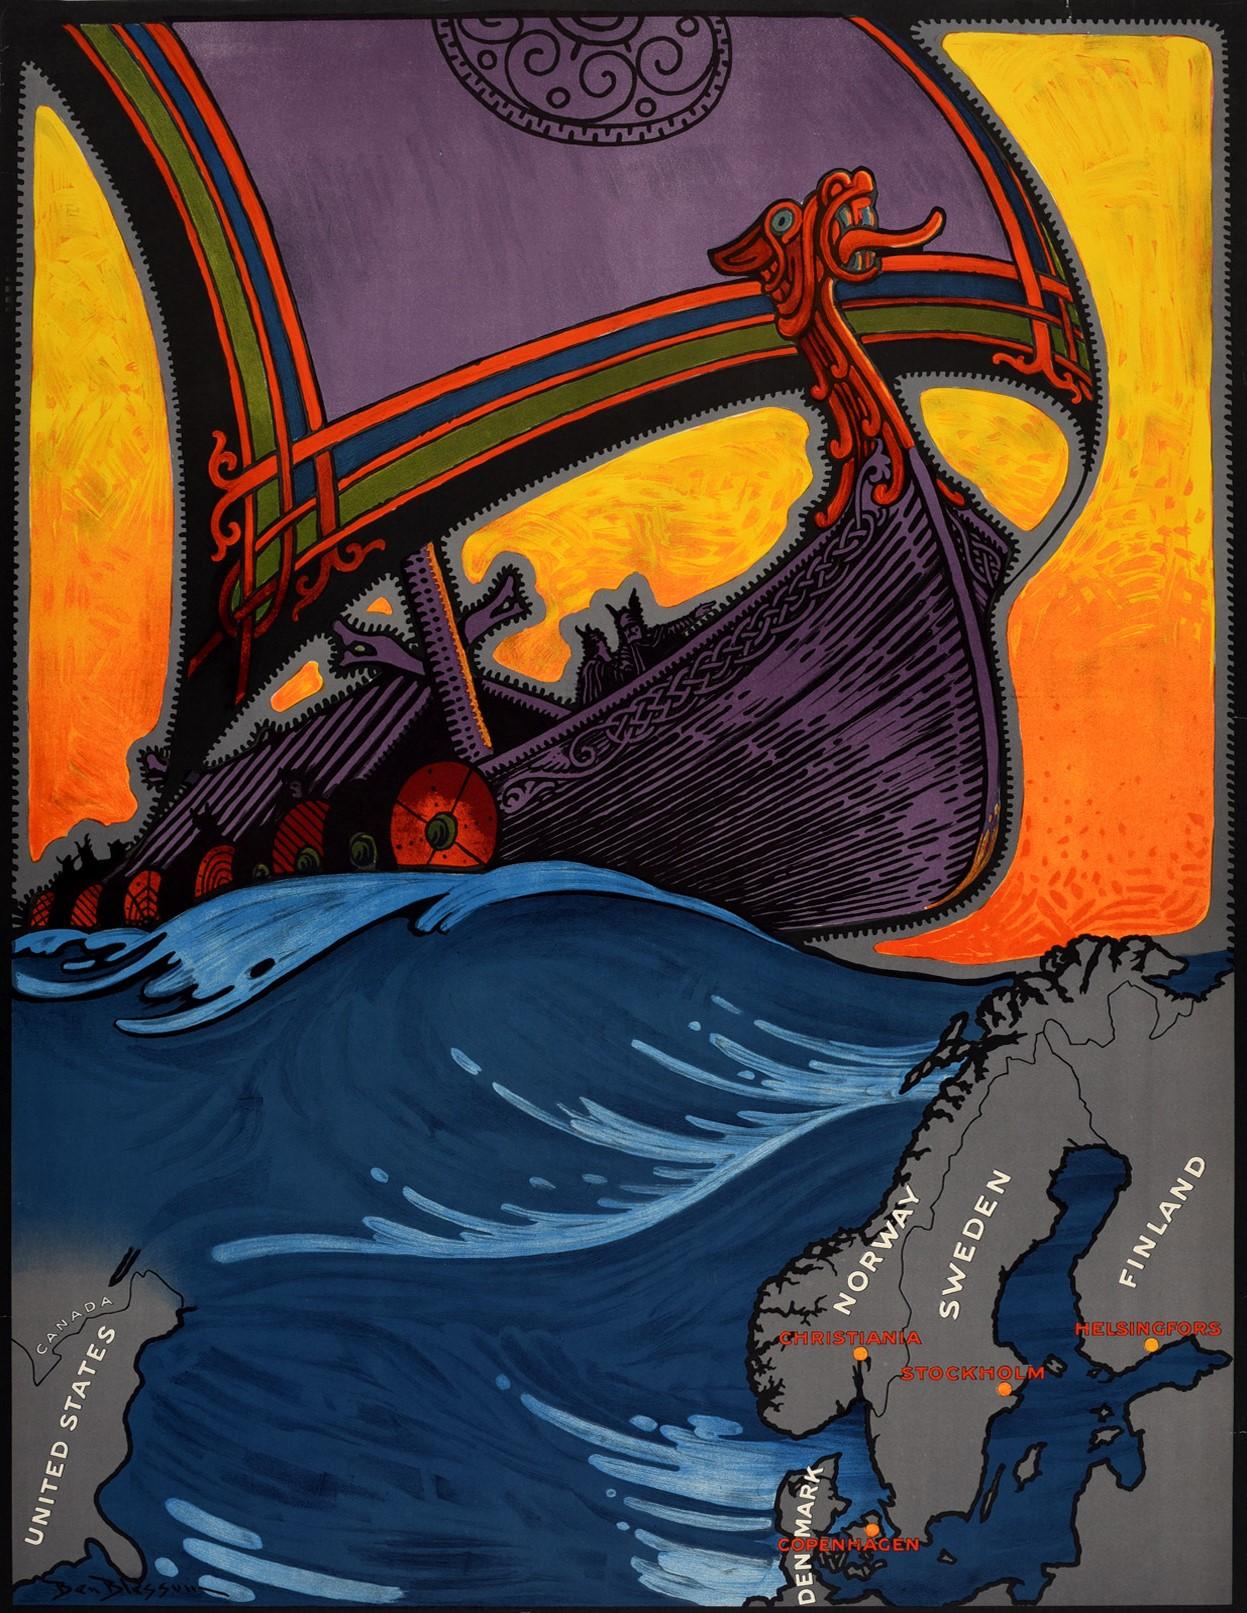 Original vintage travel poster for the Nordic countries marked on a map - Christiania (Oslo) Norway, Stockholm Sweden, Helsinki Finland, and Copenhagen Denmark - below a colorful image of a Viking warship in full sail decorated in an Old Norse style